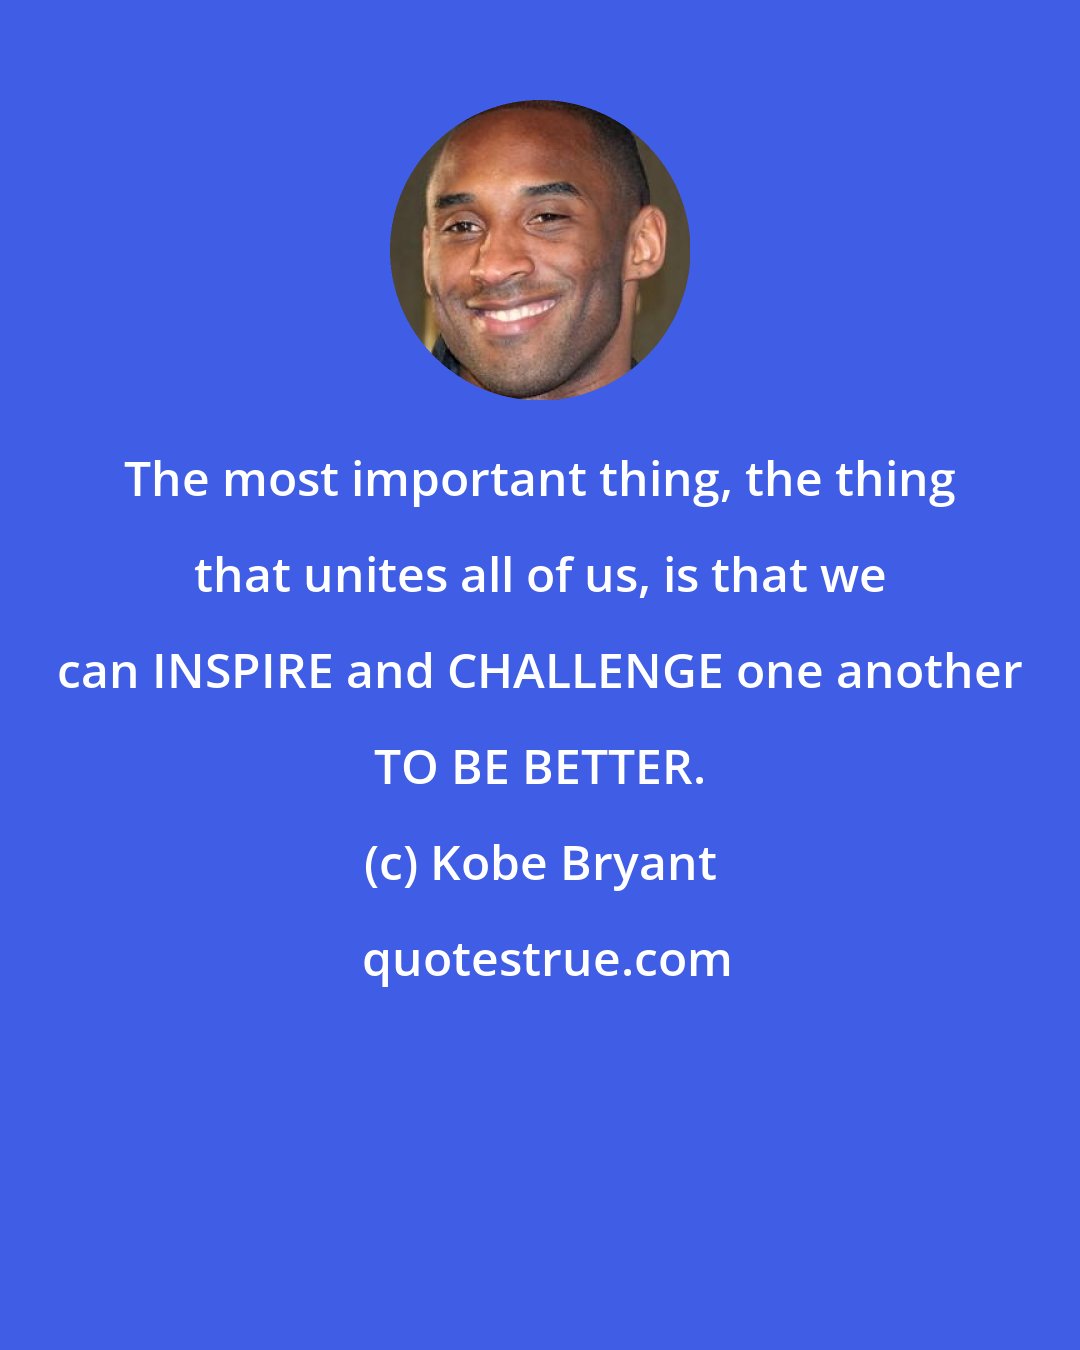 Kobe Bryant: The most important thing, the thing that unites all of us, is that we can INSPIRE and CHALLENGE one another TO BE BETTER.